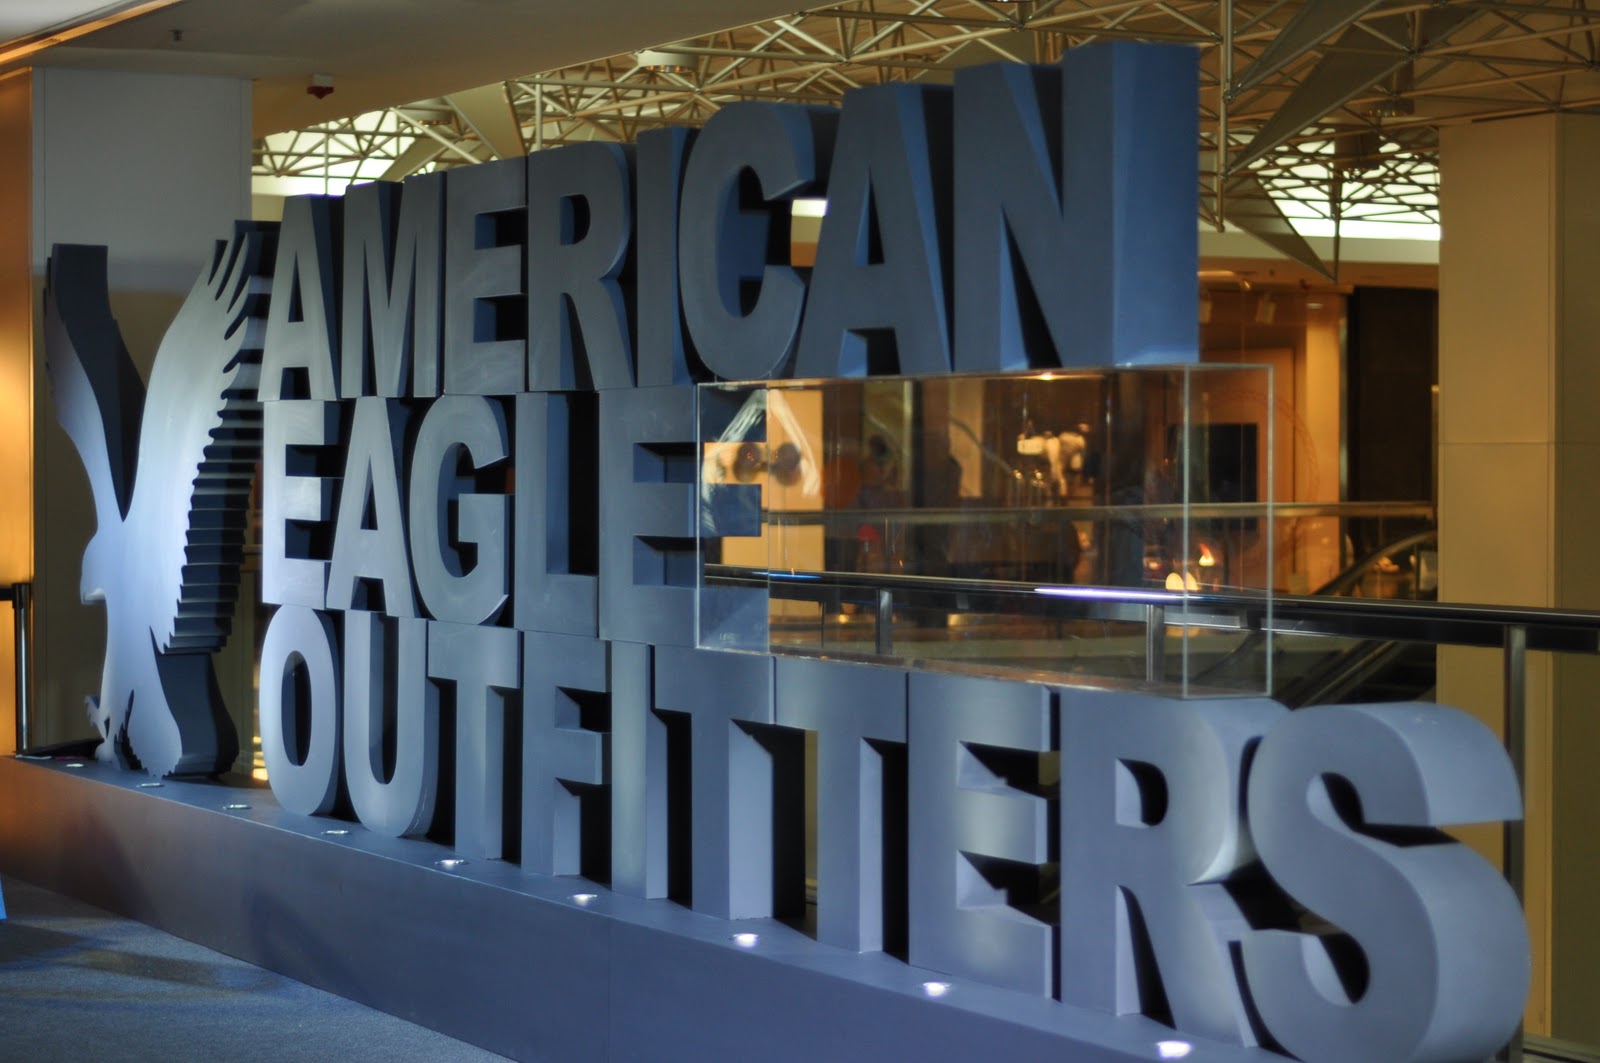 American Eagle Outfitters Has Landed in Hong Kong